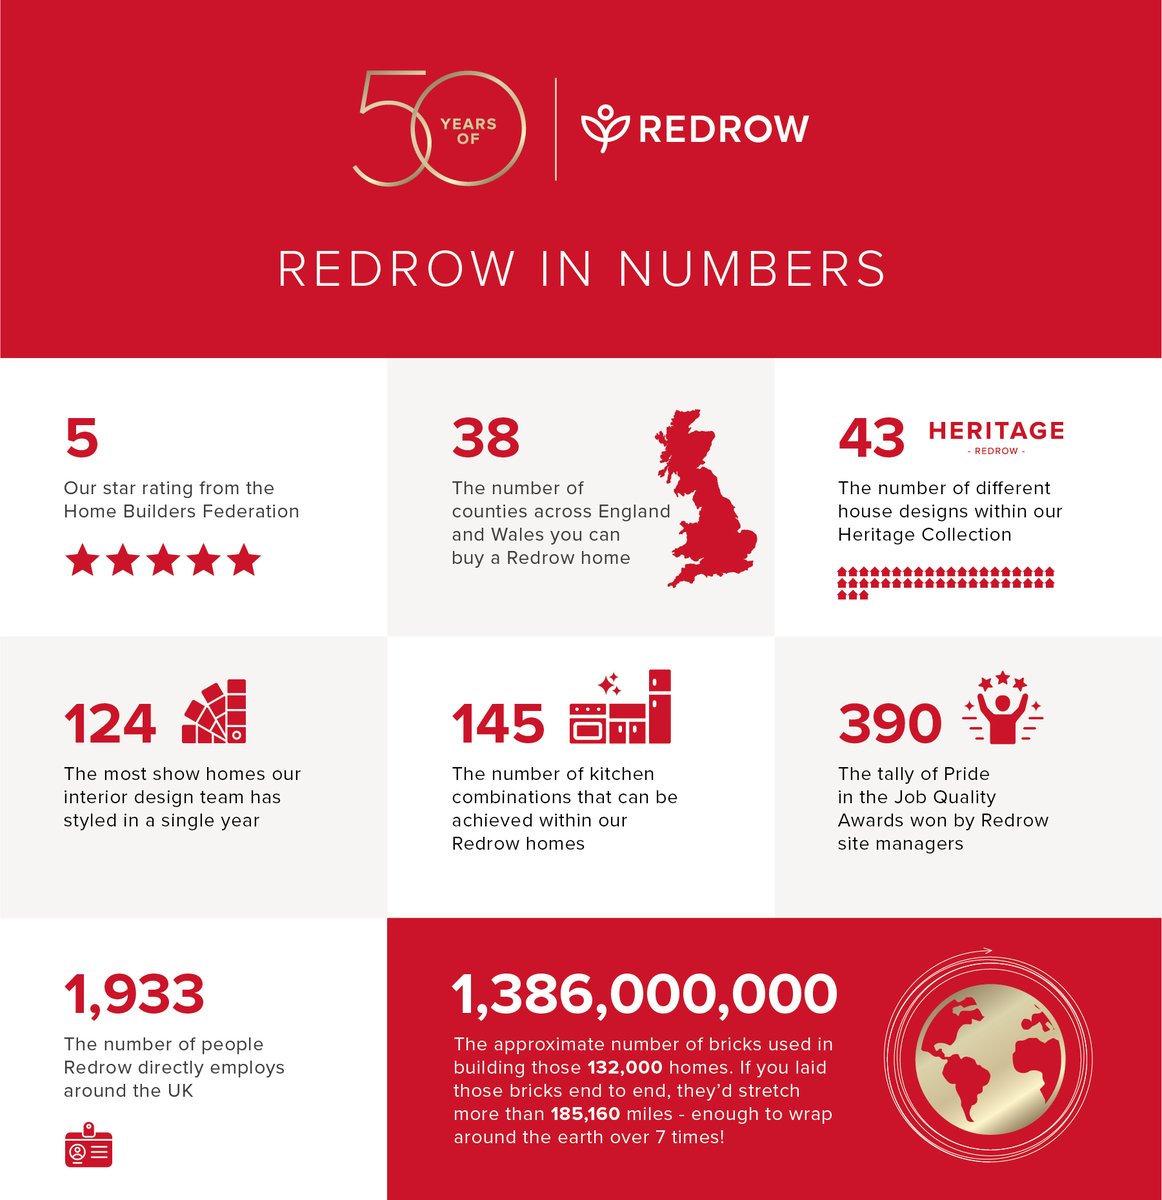 We're just going to leave this here... 🧱From house designs in our #HeritageCollection to the number of show homes designed and quantity of bricks uses plus more!! Find out more about us in numbers here: bit.ly/4dCxSNF #Redrow50 #50YearsOfABetterWayToLive